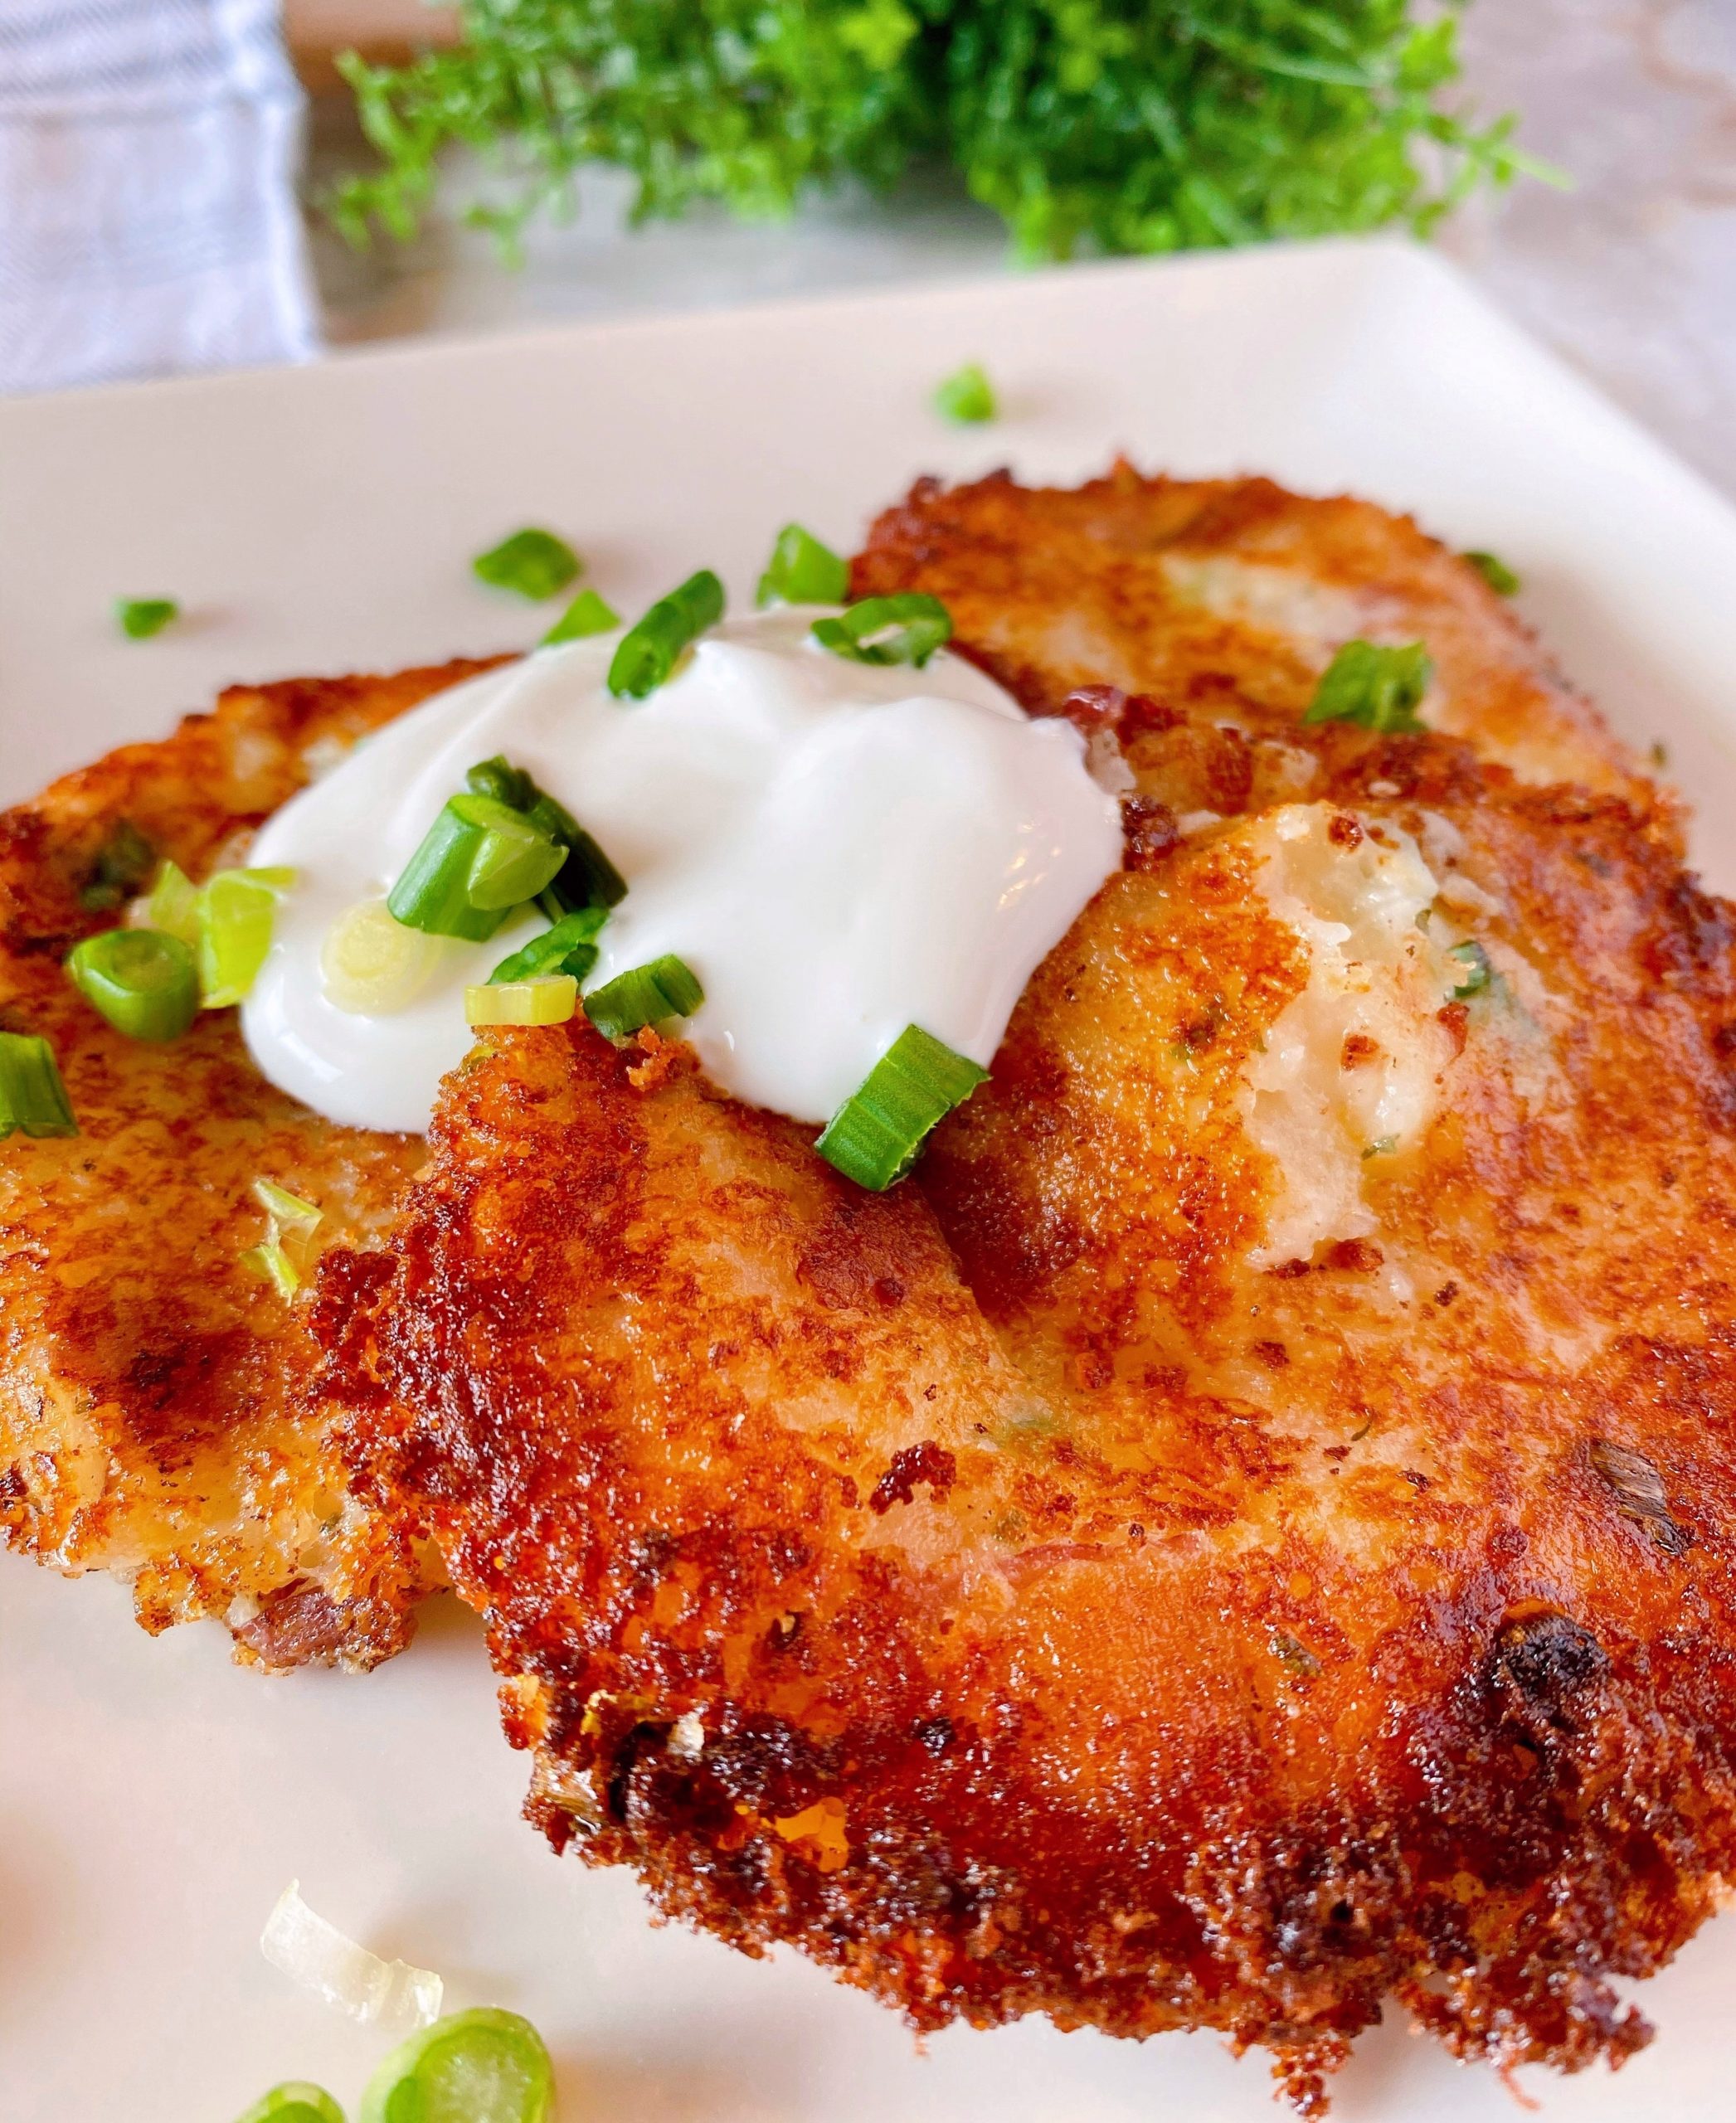 Mashed Potato Cakes - Back To My Southern Roots